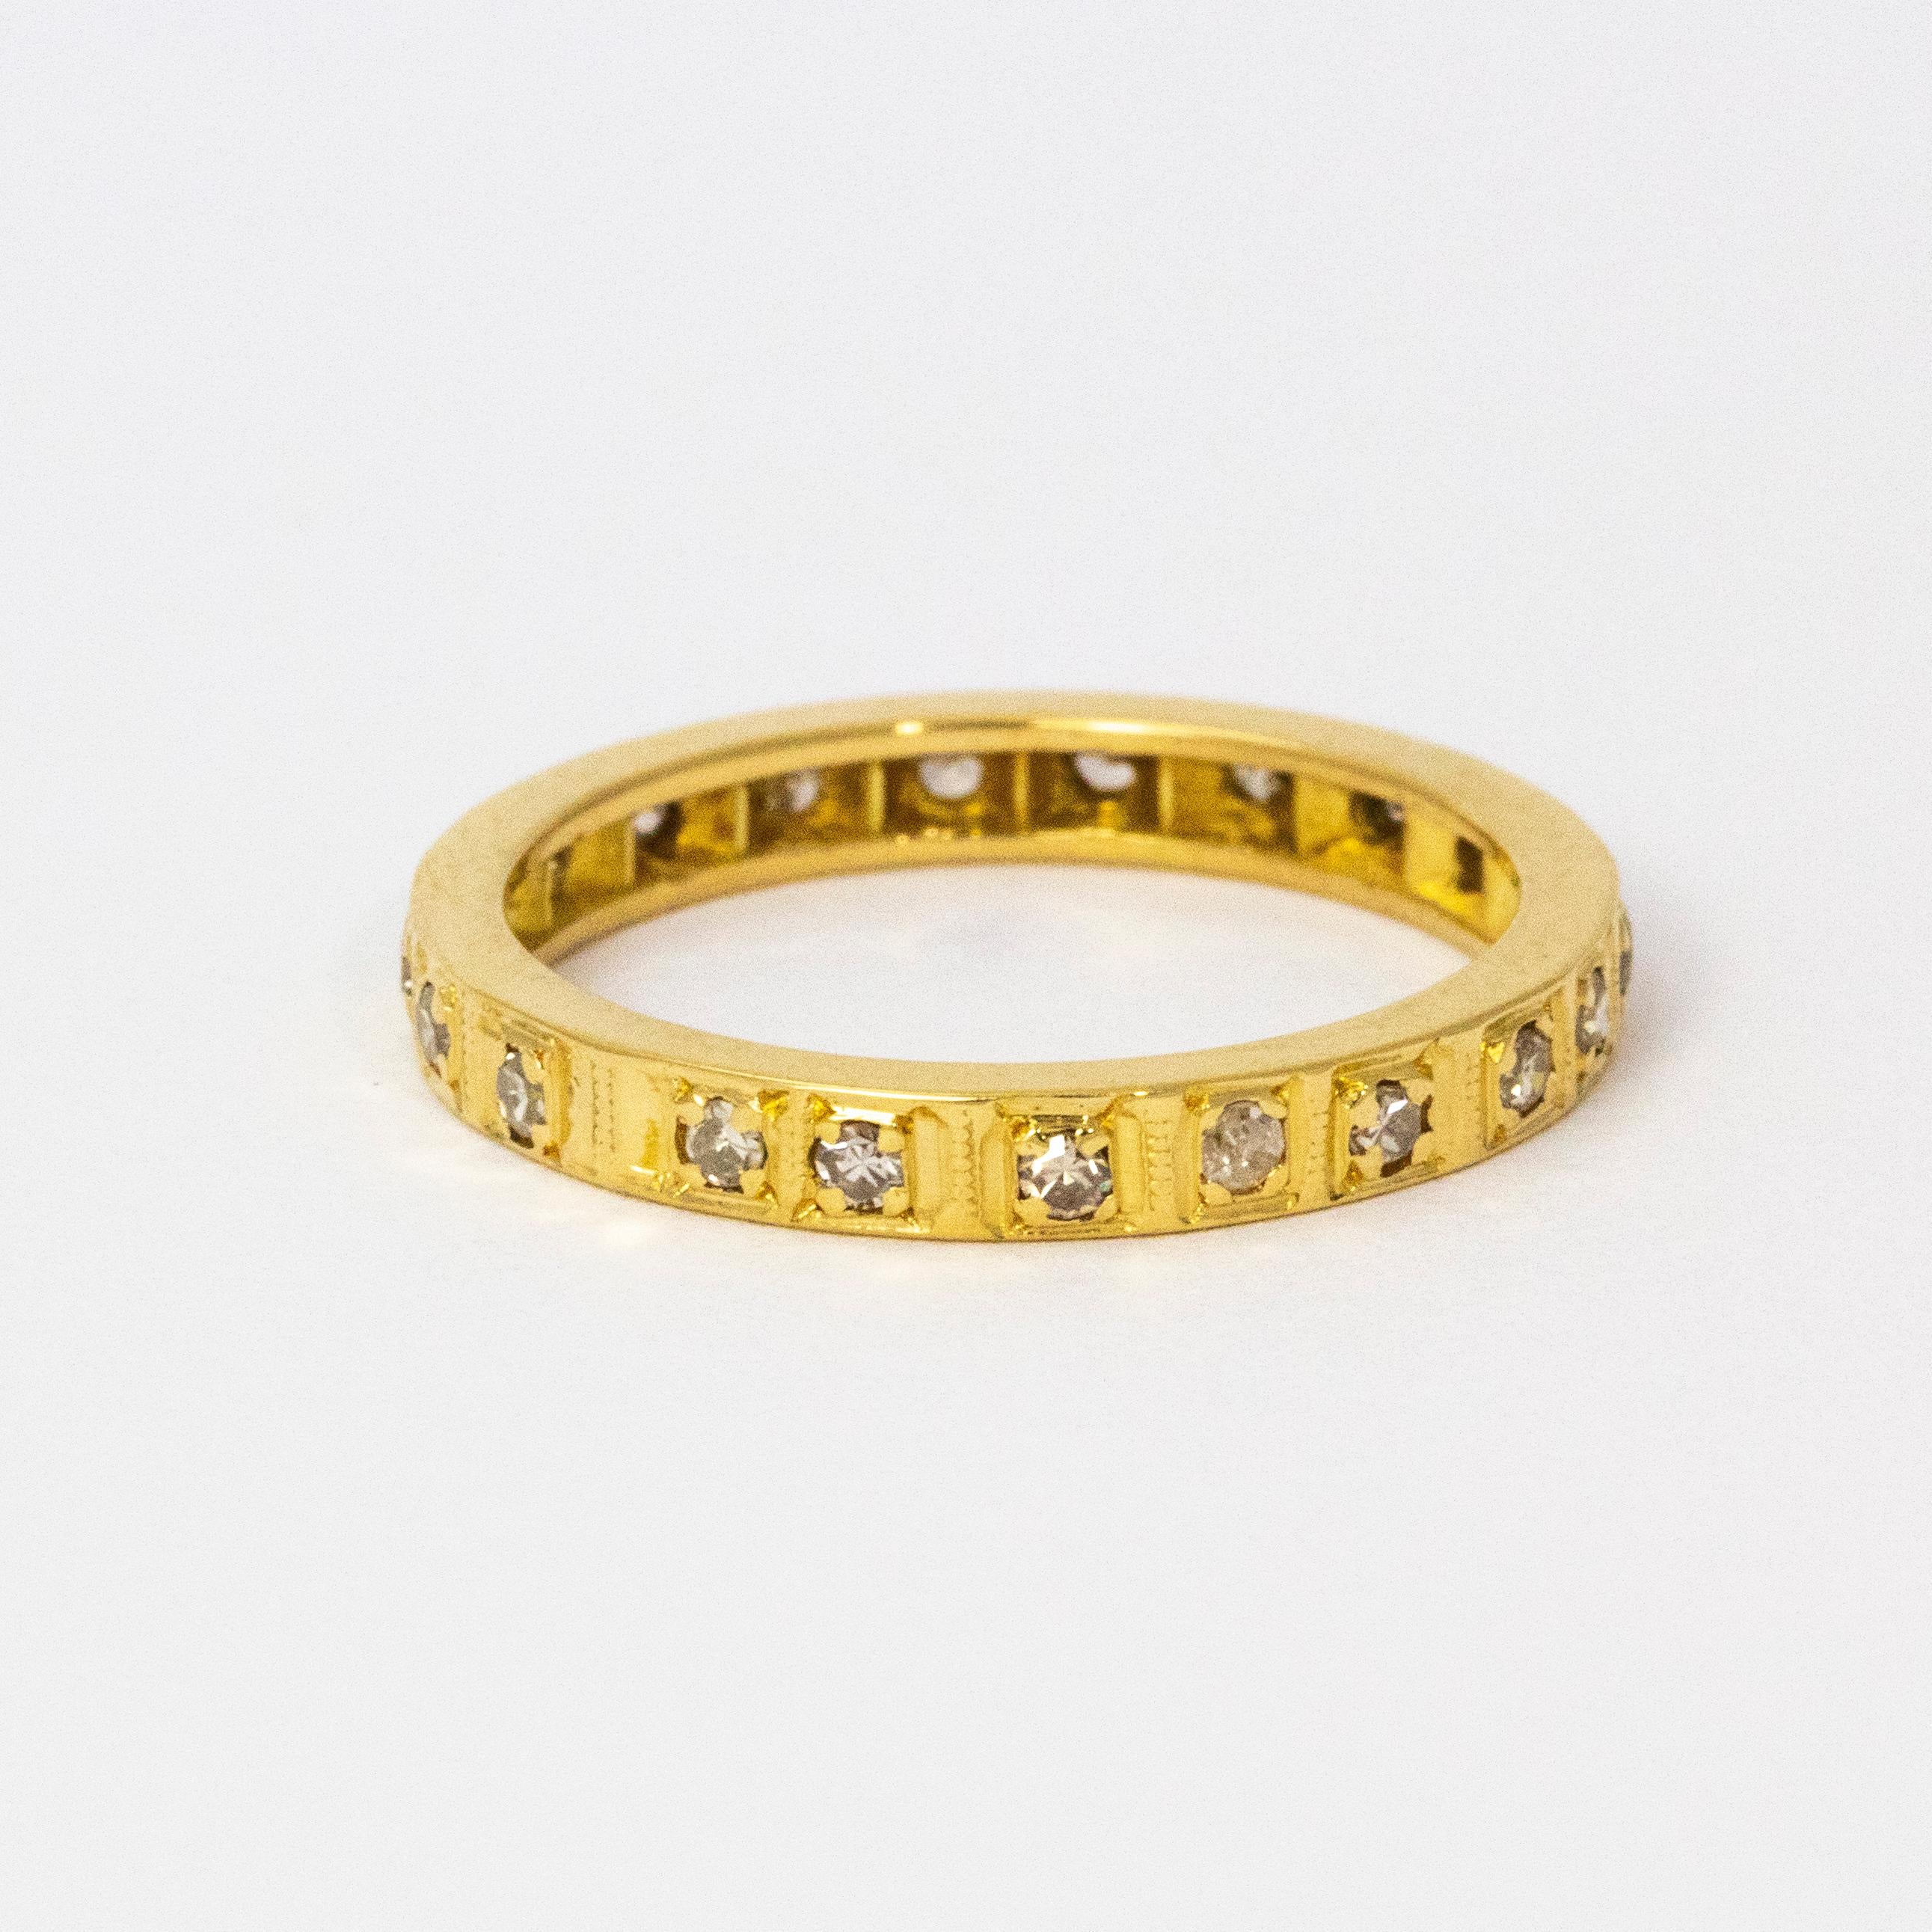 An exquisite Art Deco eternity band fully set with stunning white diamonds and modelled in 18 karat yellow gold.

Ring Size: L or 6